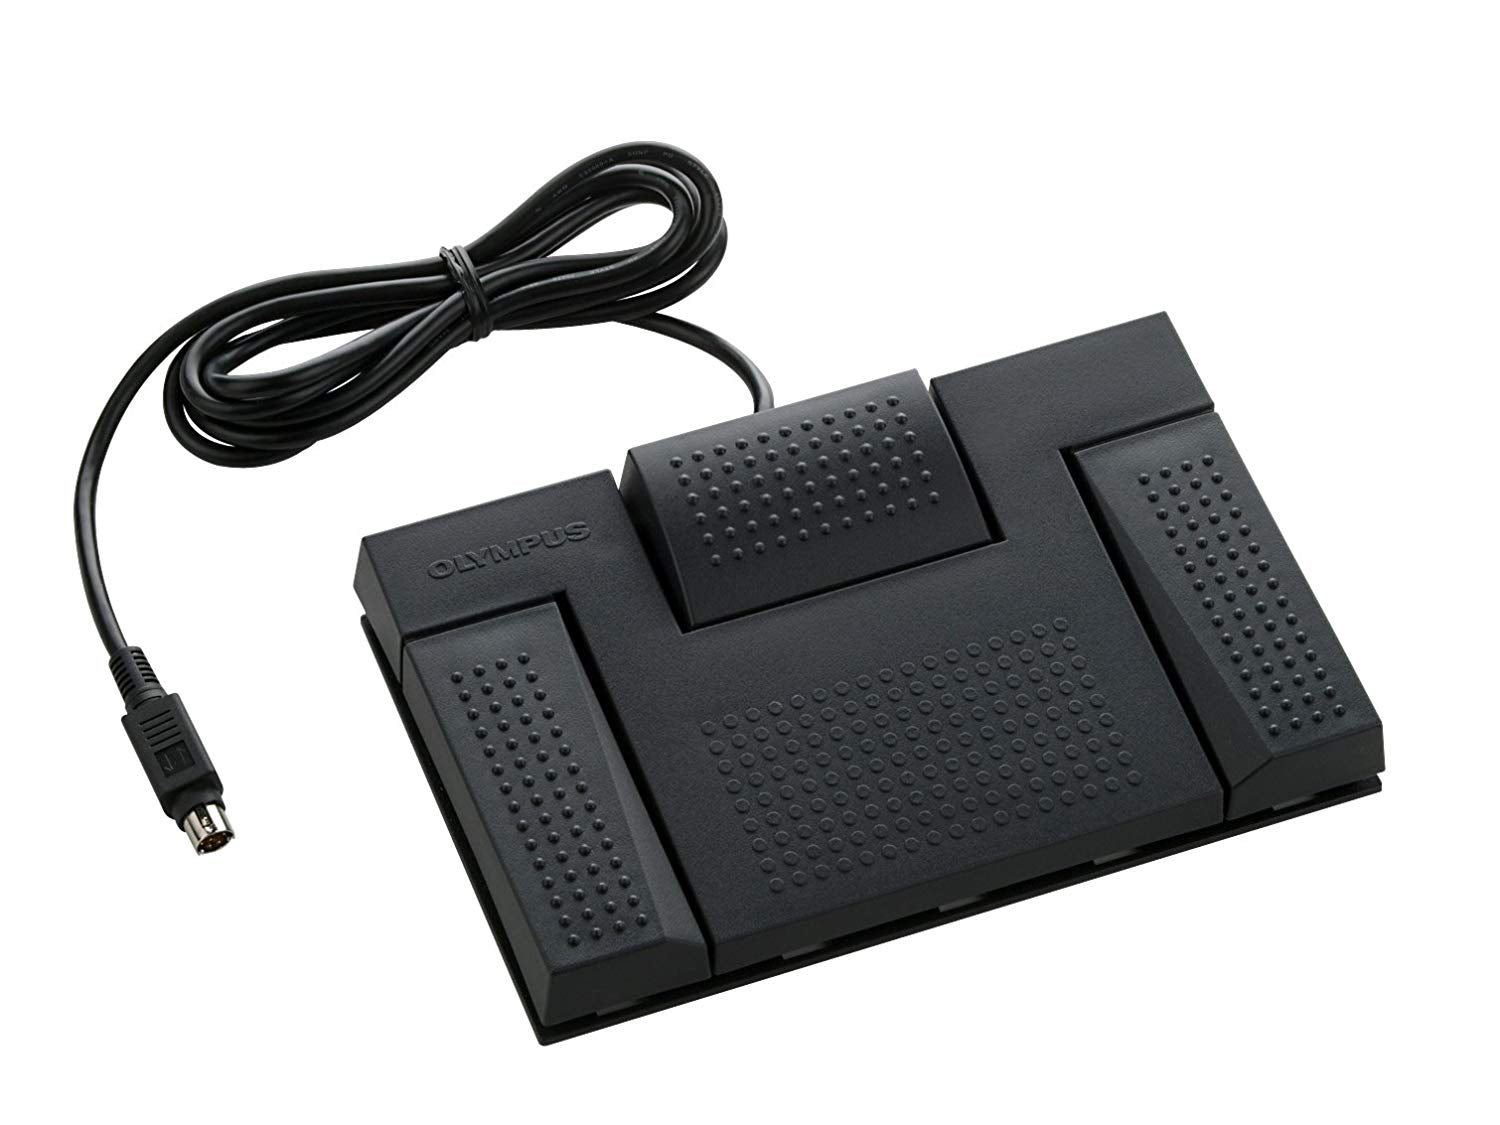 Olympus RS28H Foot Pedal - Dictation Solutions Australia